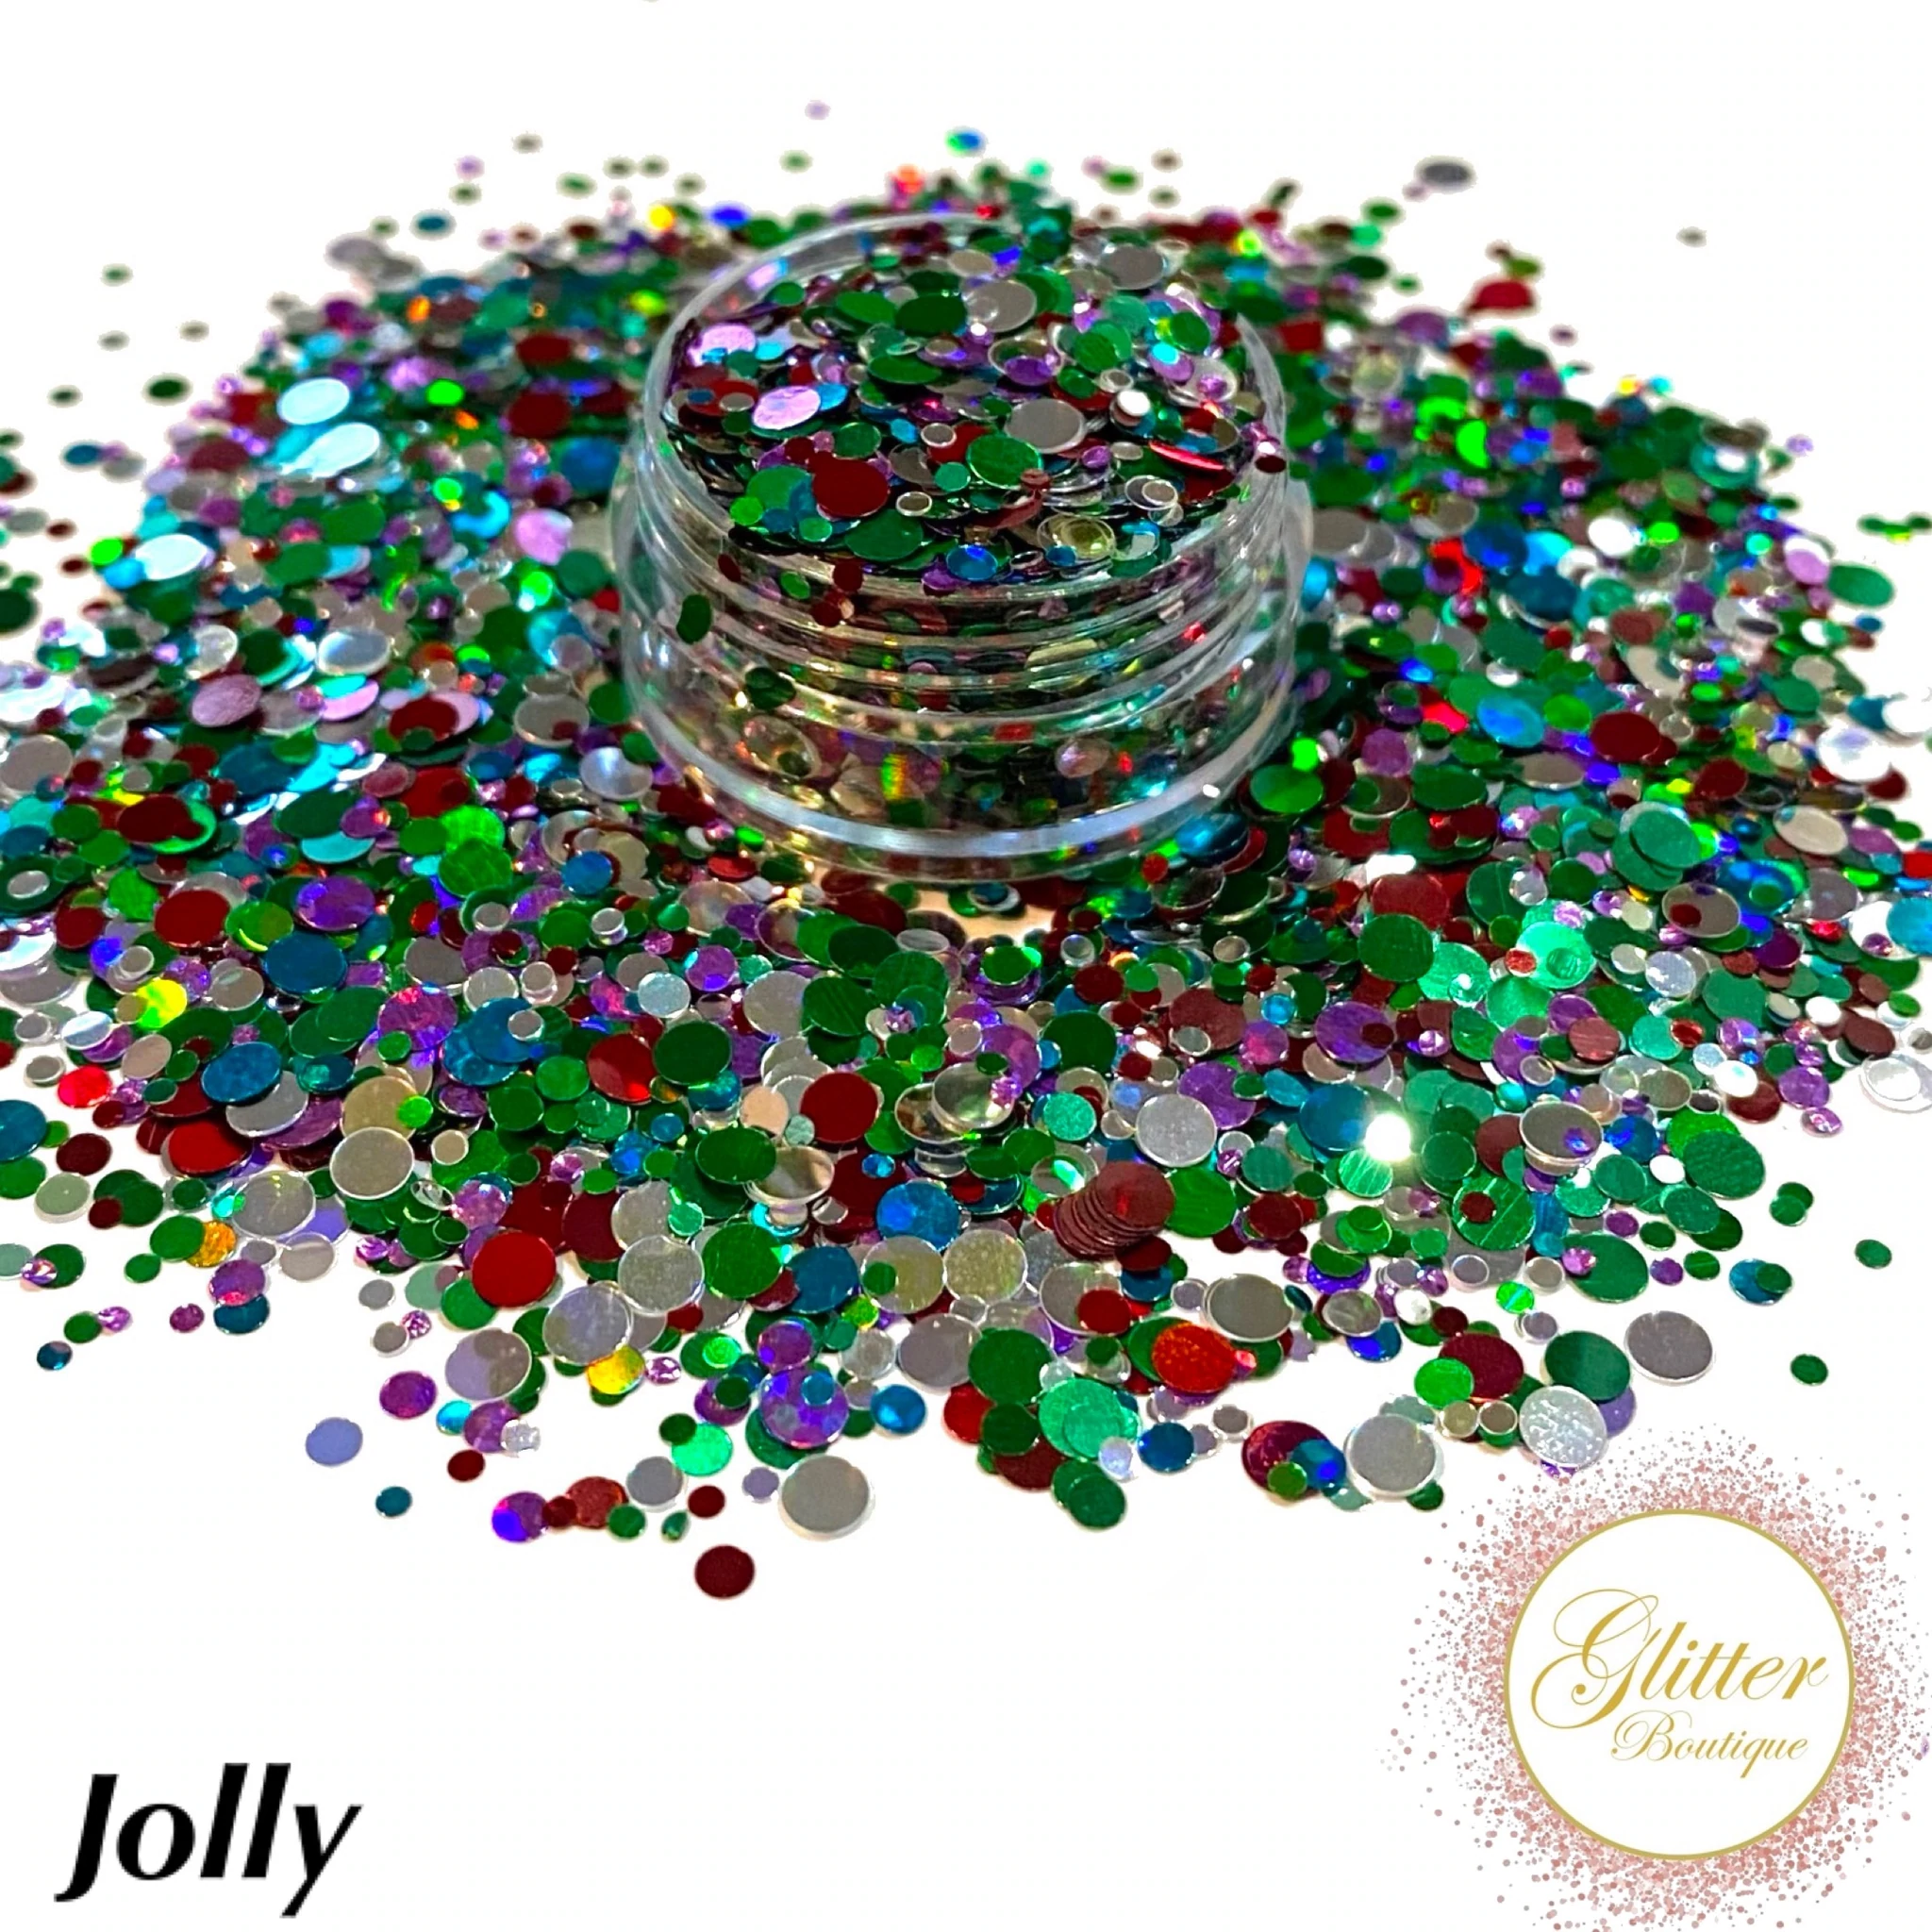 Glitter Boutique - Jolly - Creata Beauty - Professional Beauty Products